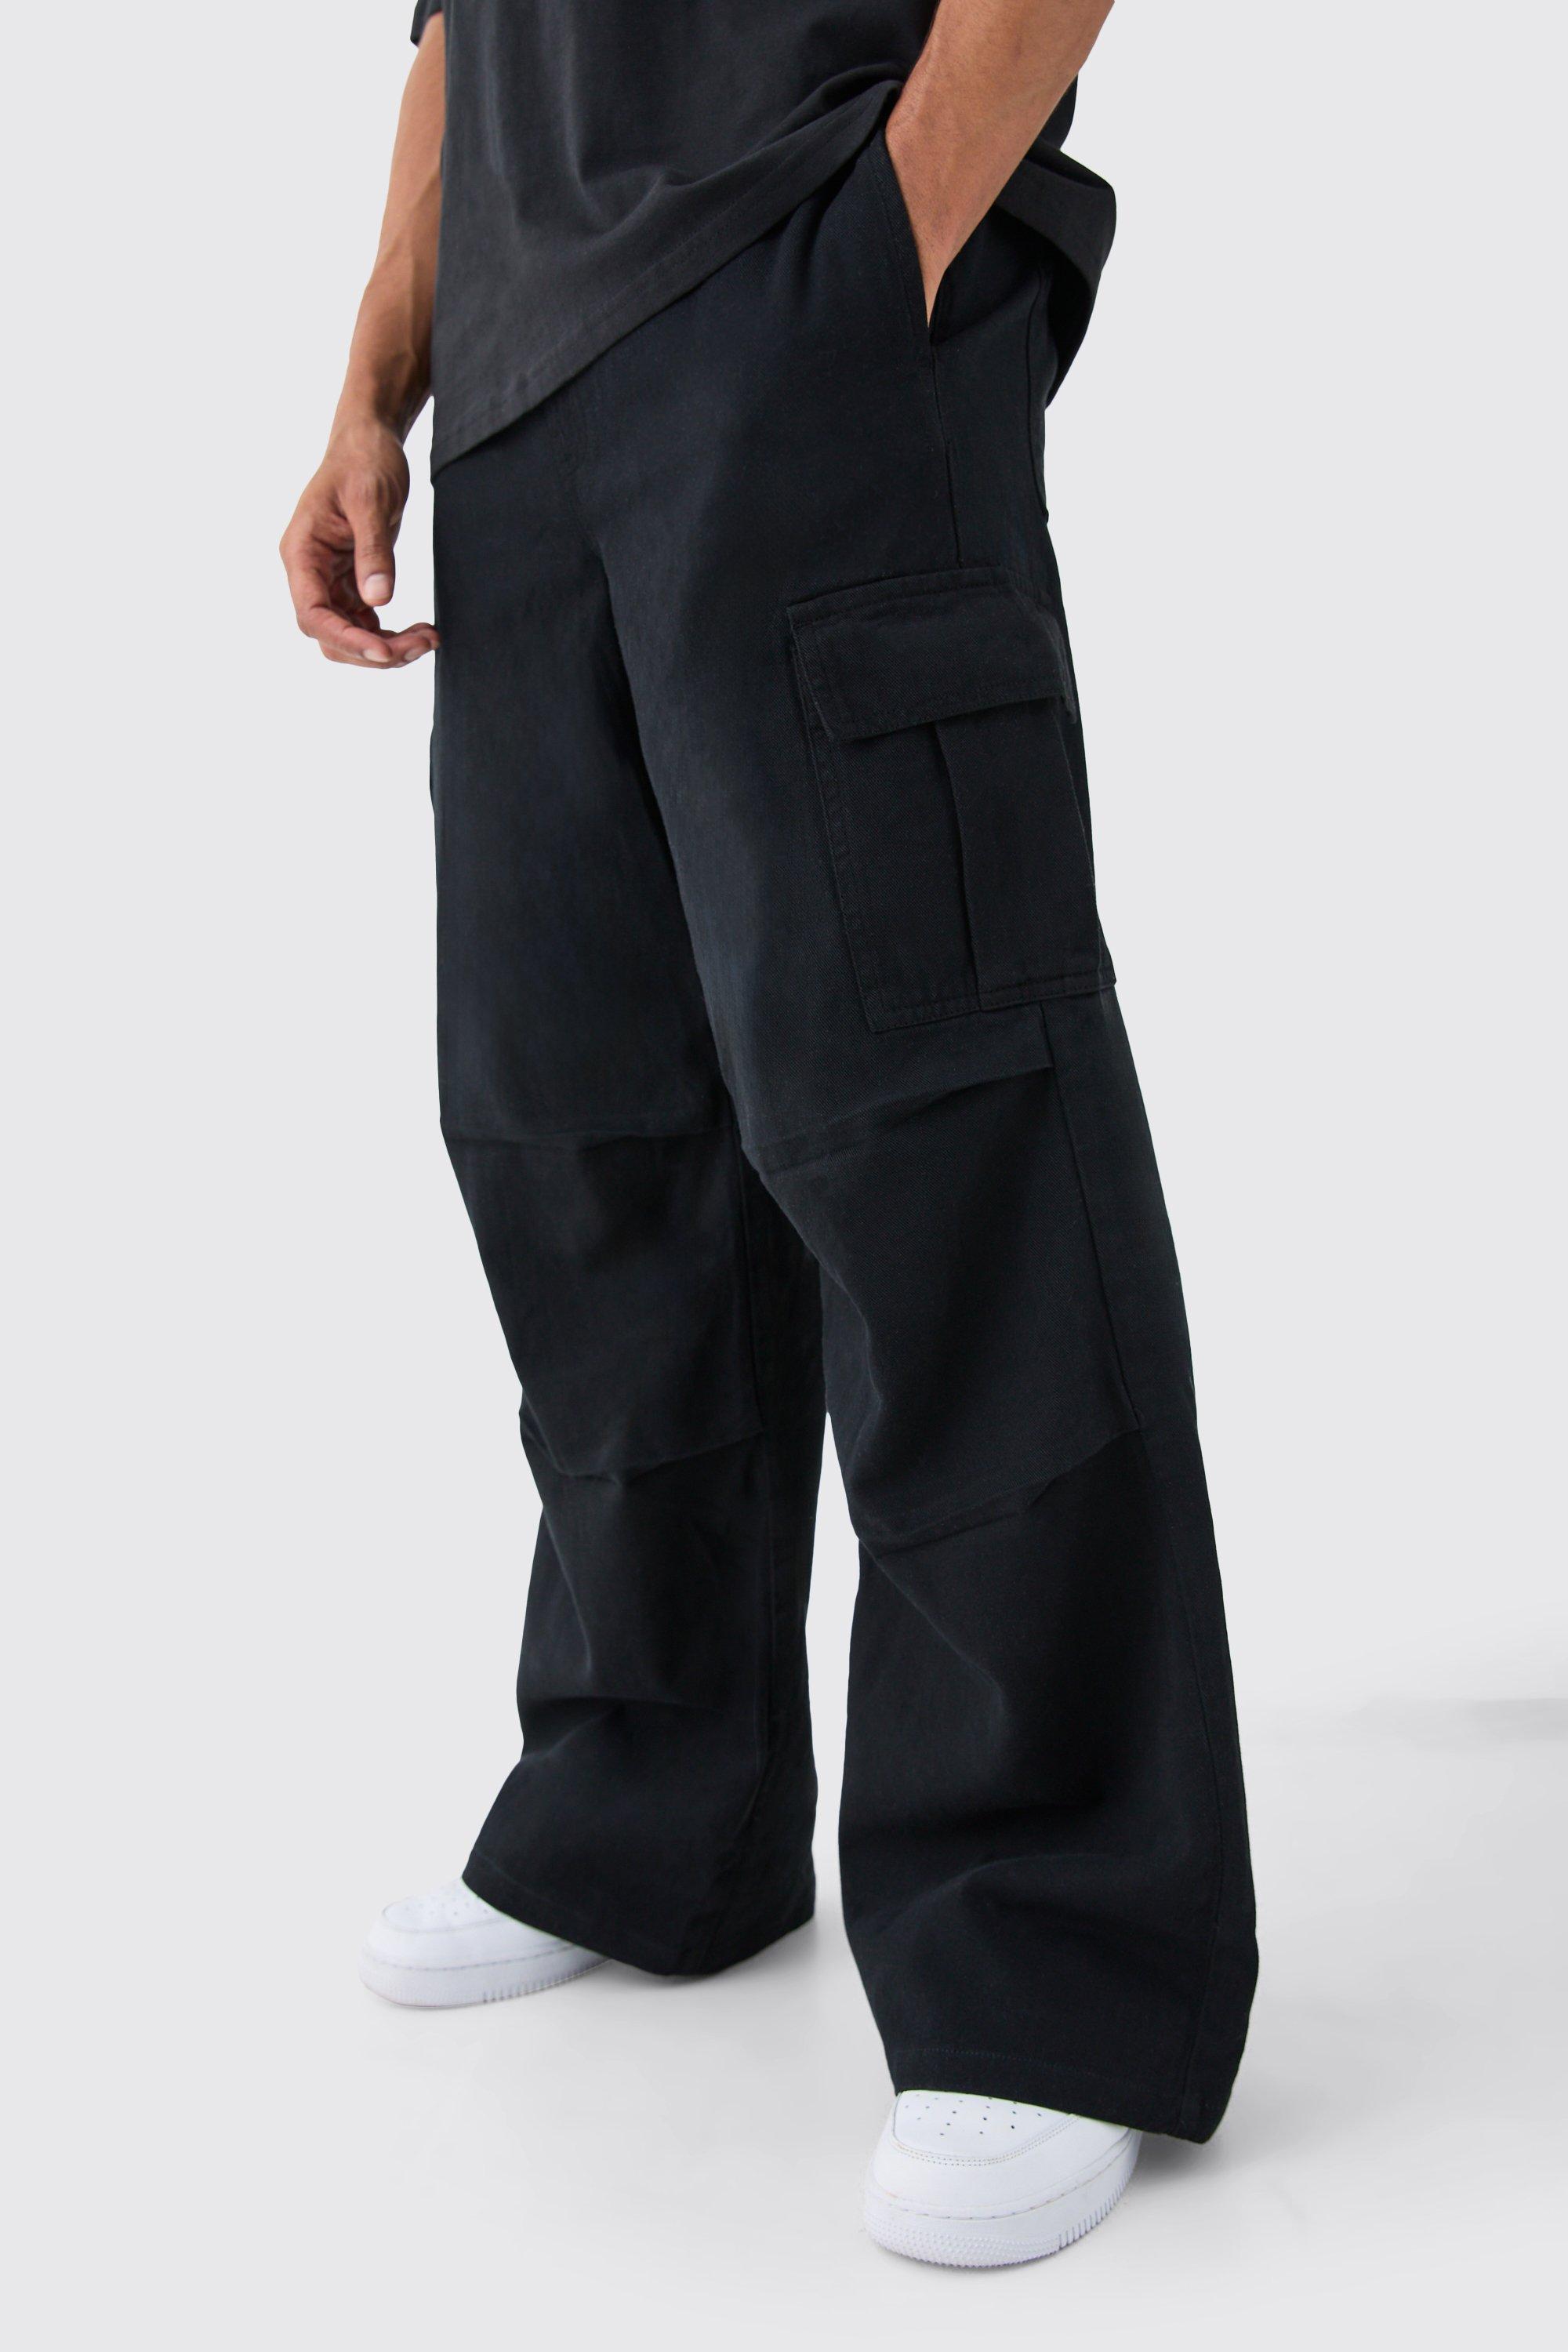 Boohoo Extreme Baggy Fit Cargo Pants In Black, Black